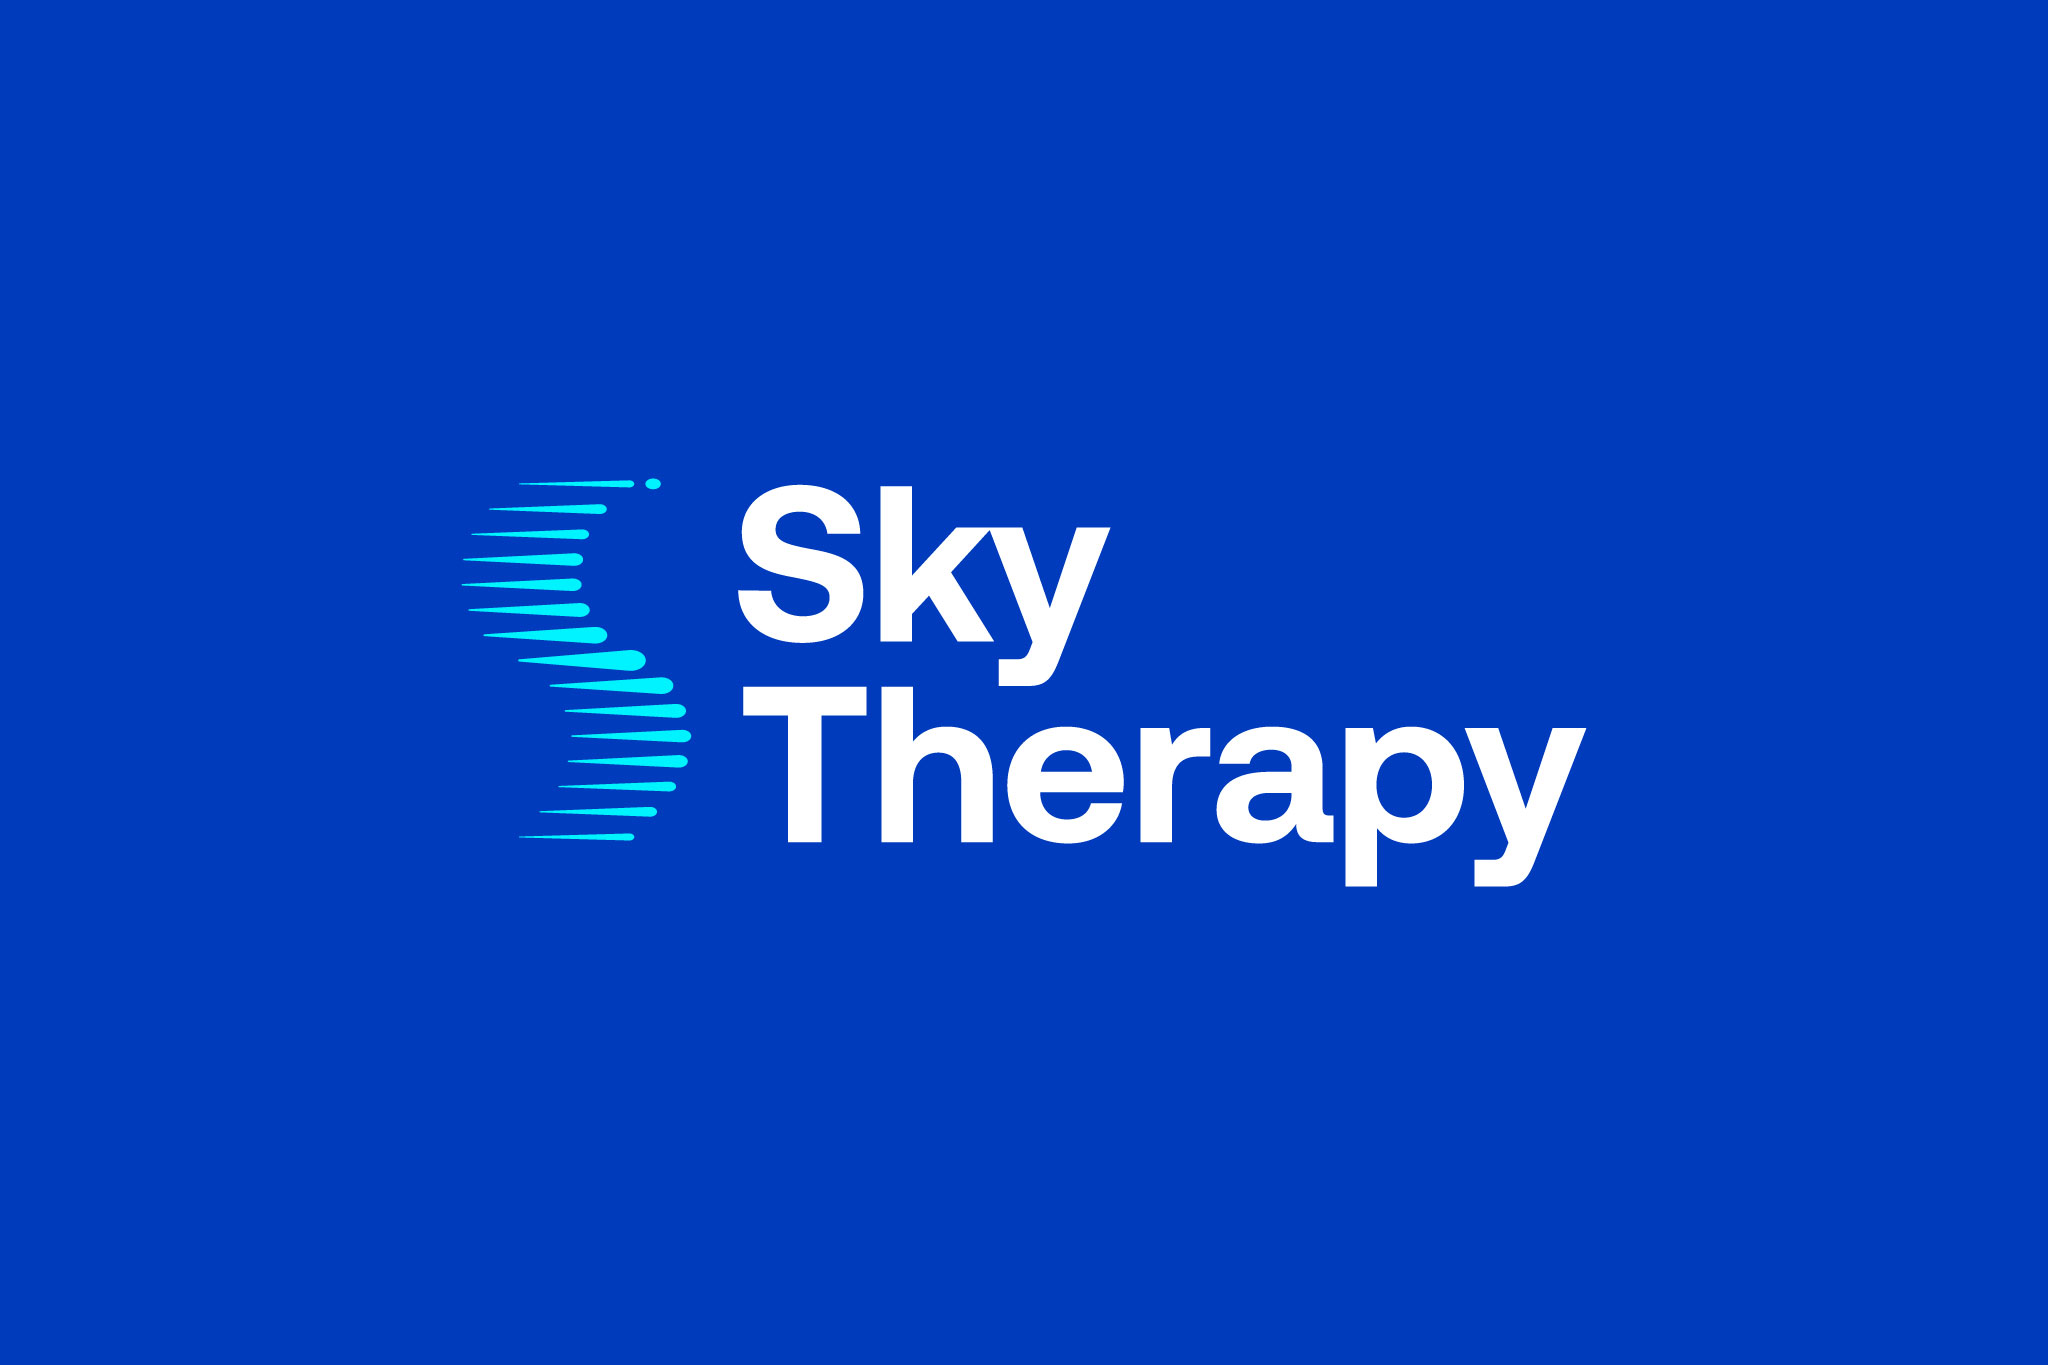 THIẾT KẾ LOGO Y TẾ SKY THERAPY